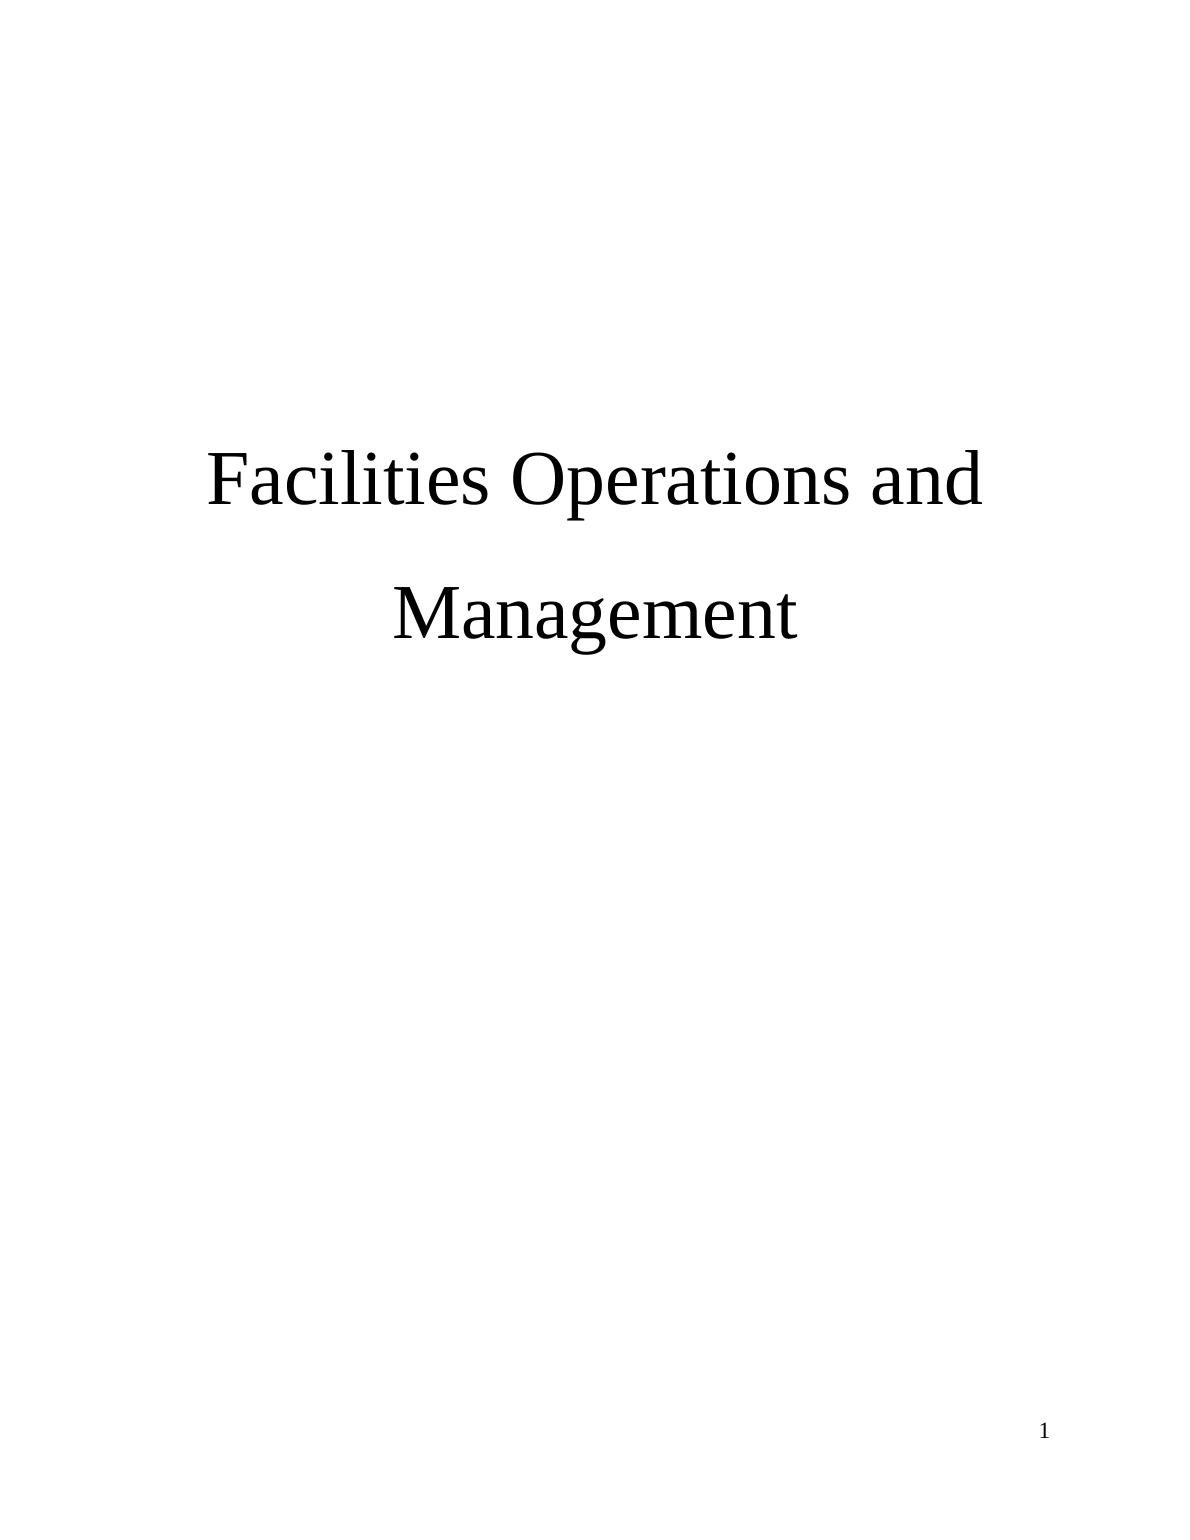 Facilities Operations and Management Assignment - Rose and Crown Hotel_1